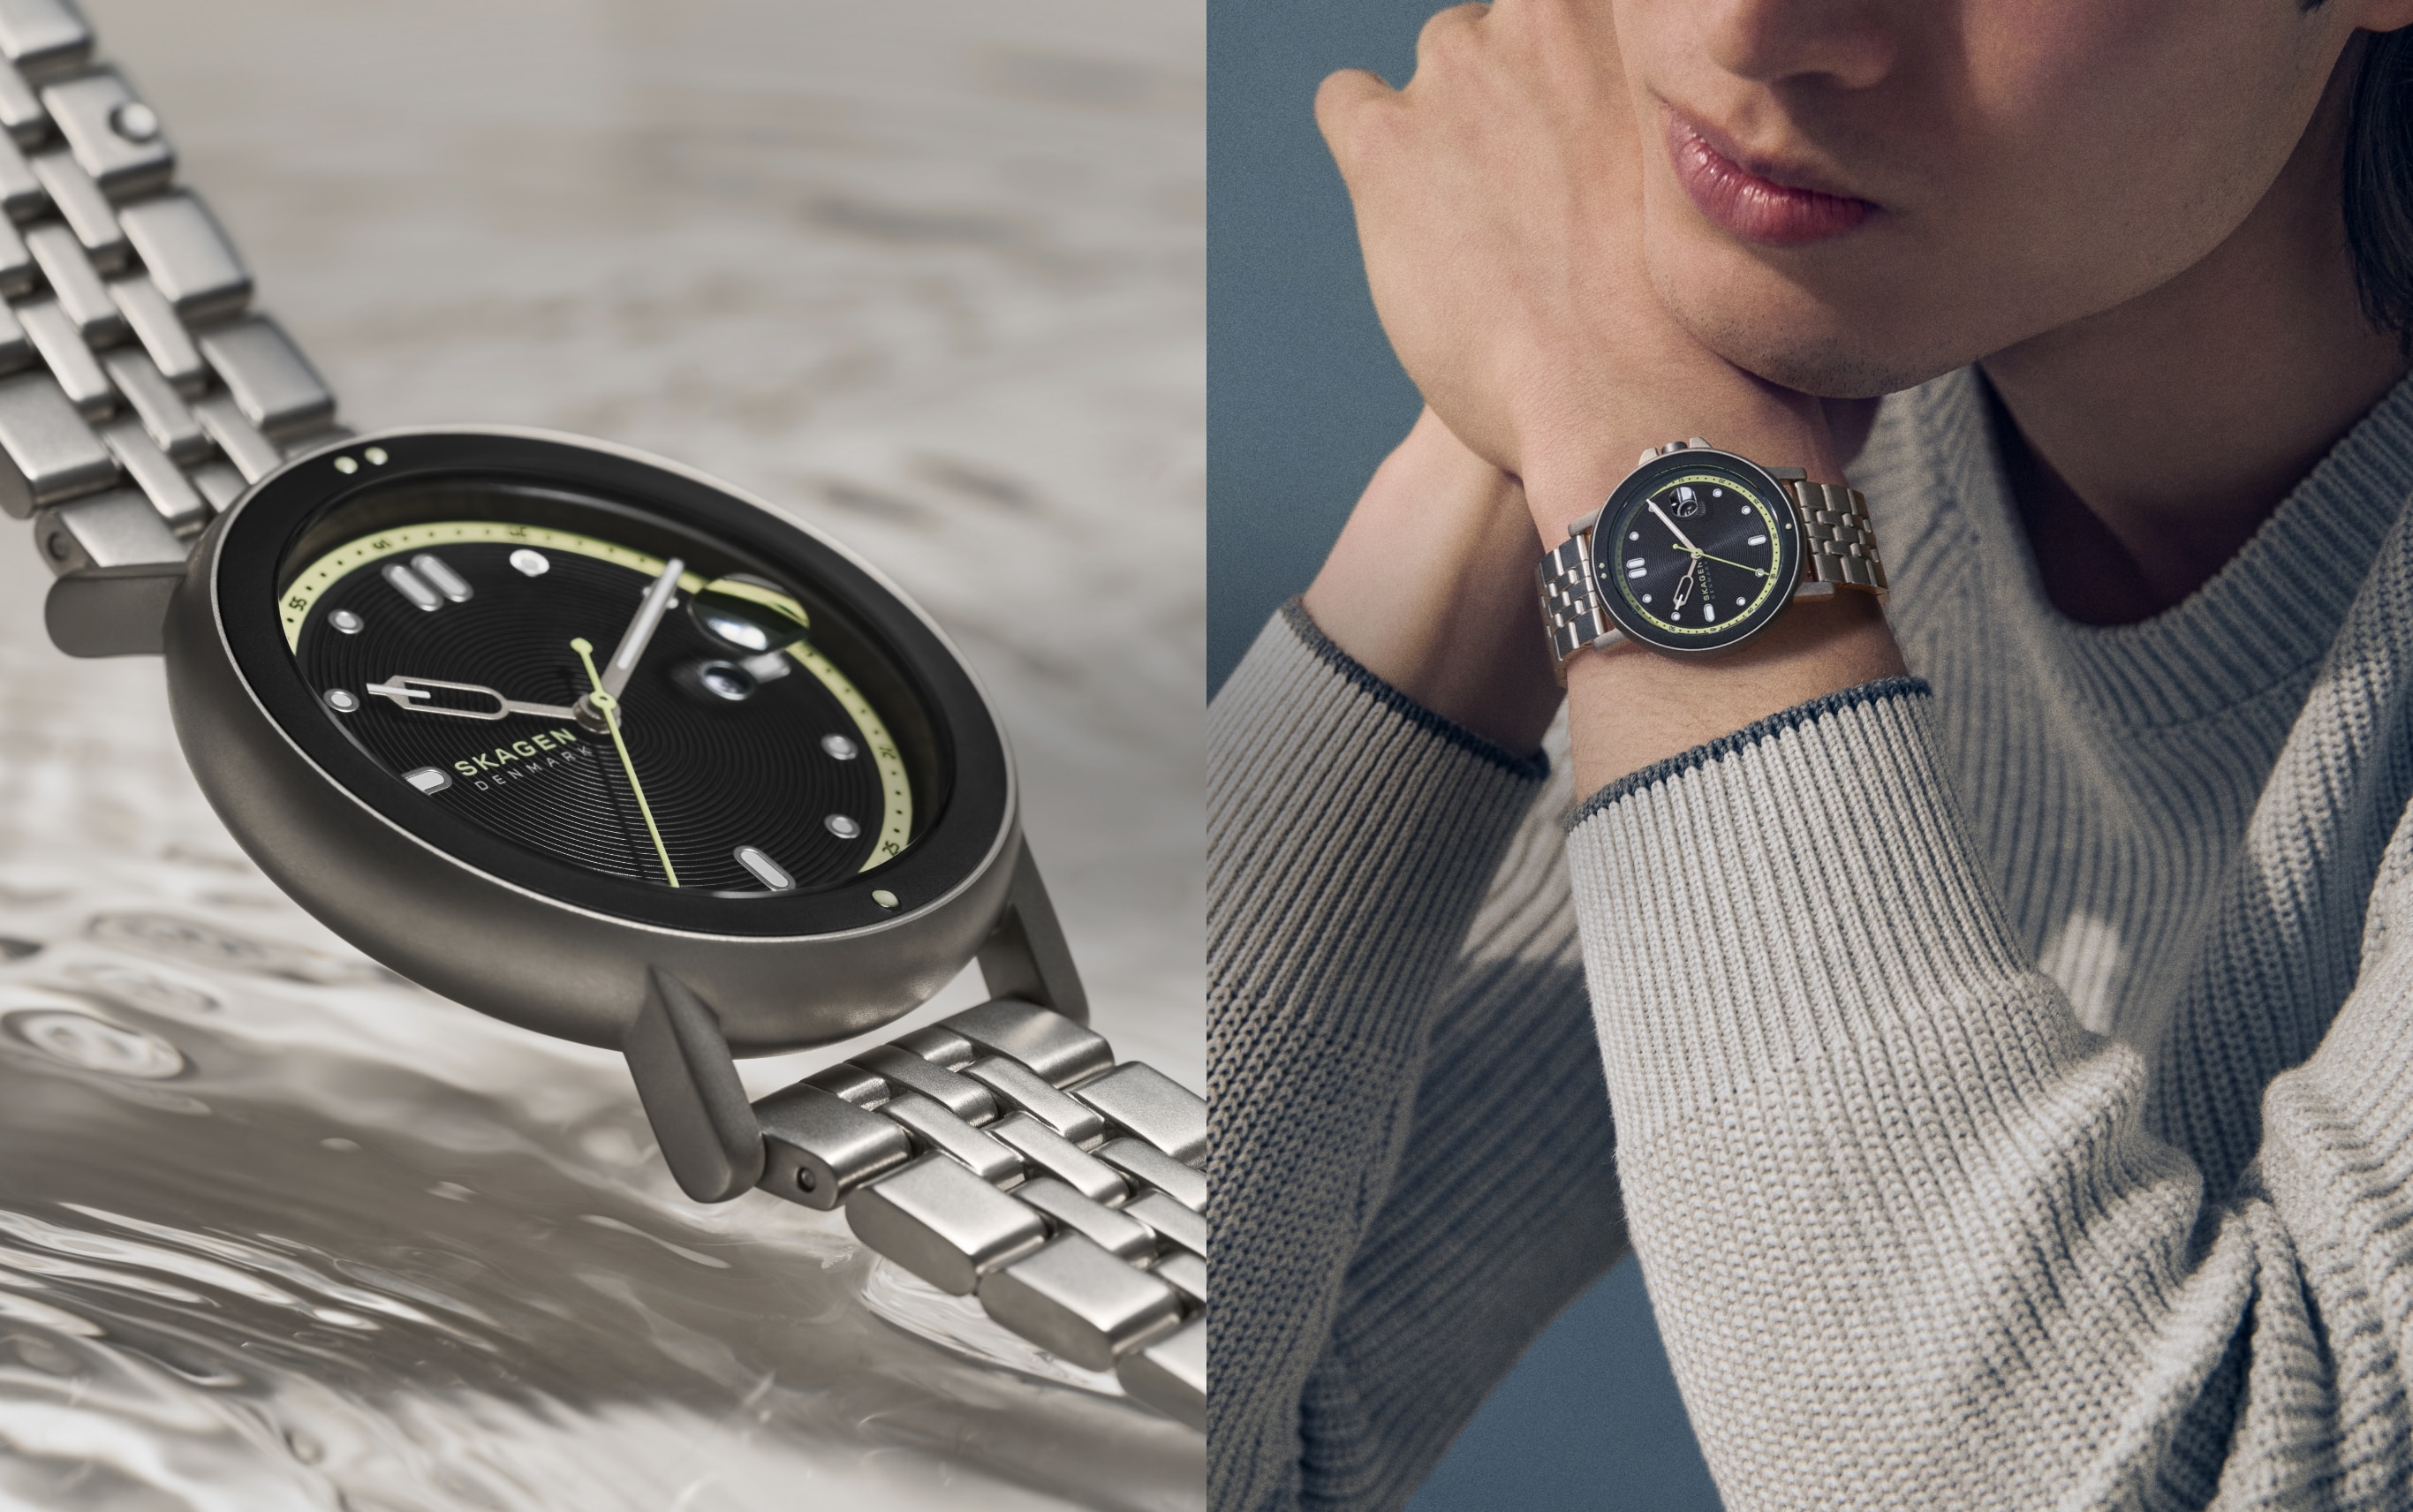 Carousel of images showing the new Signatur Sport watch and Copenhagen